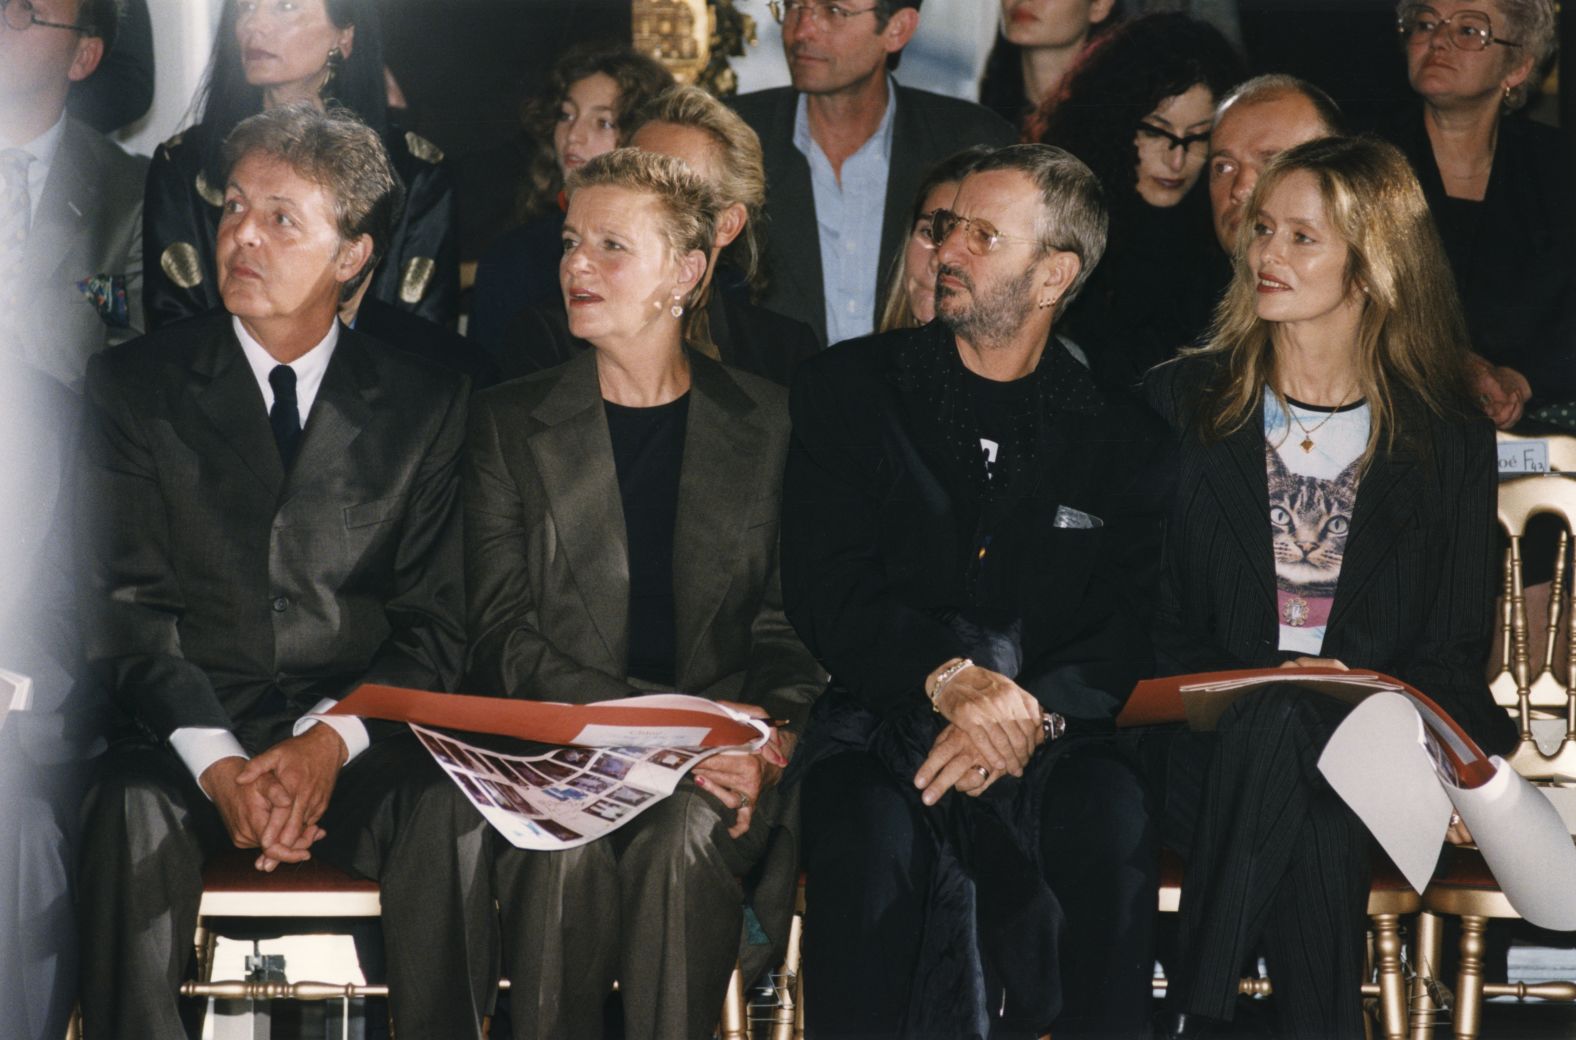 Starr and his wife, Barbara, sit with McCartney and his wife, Linda, at a fashion show in Paris in 1997. They were there to support McCartney's daughter Stella, a fashion designer.